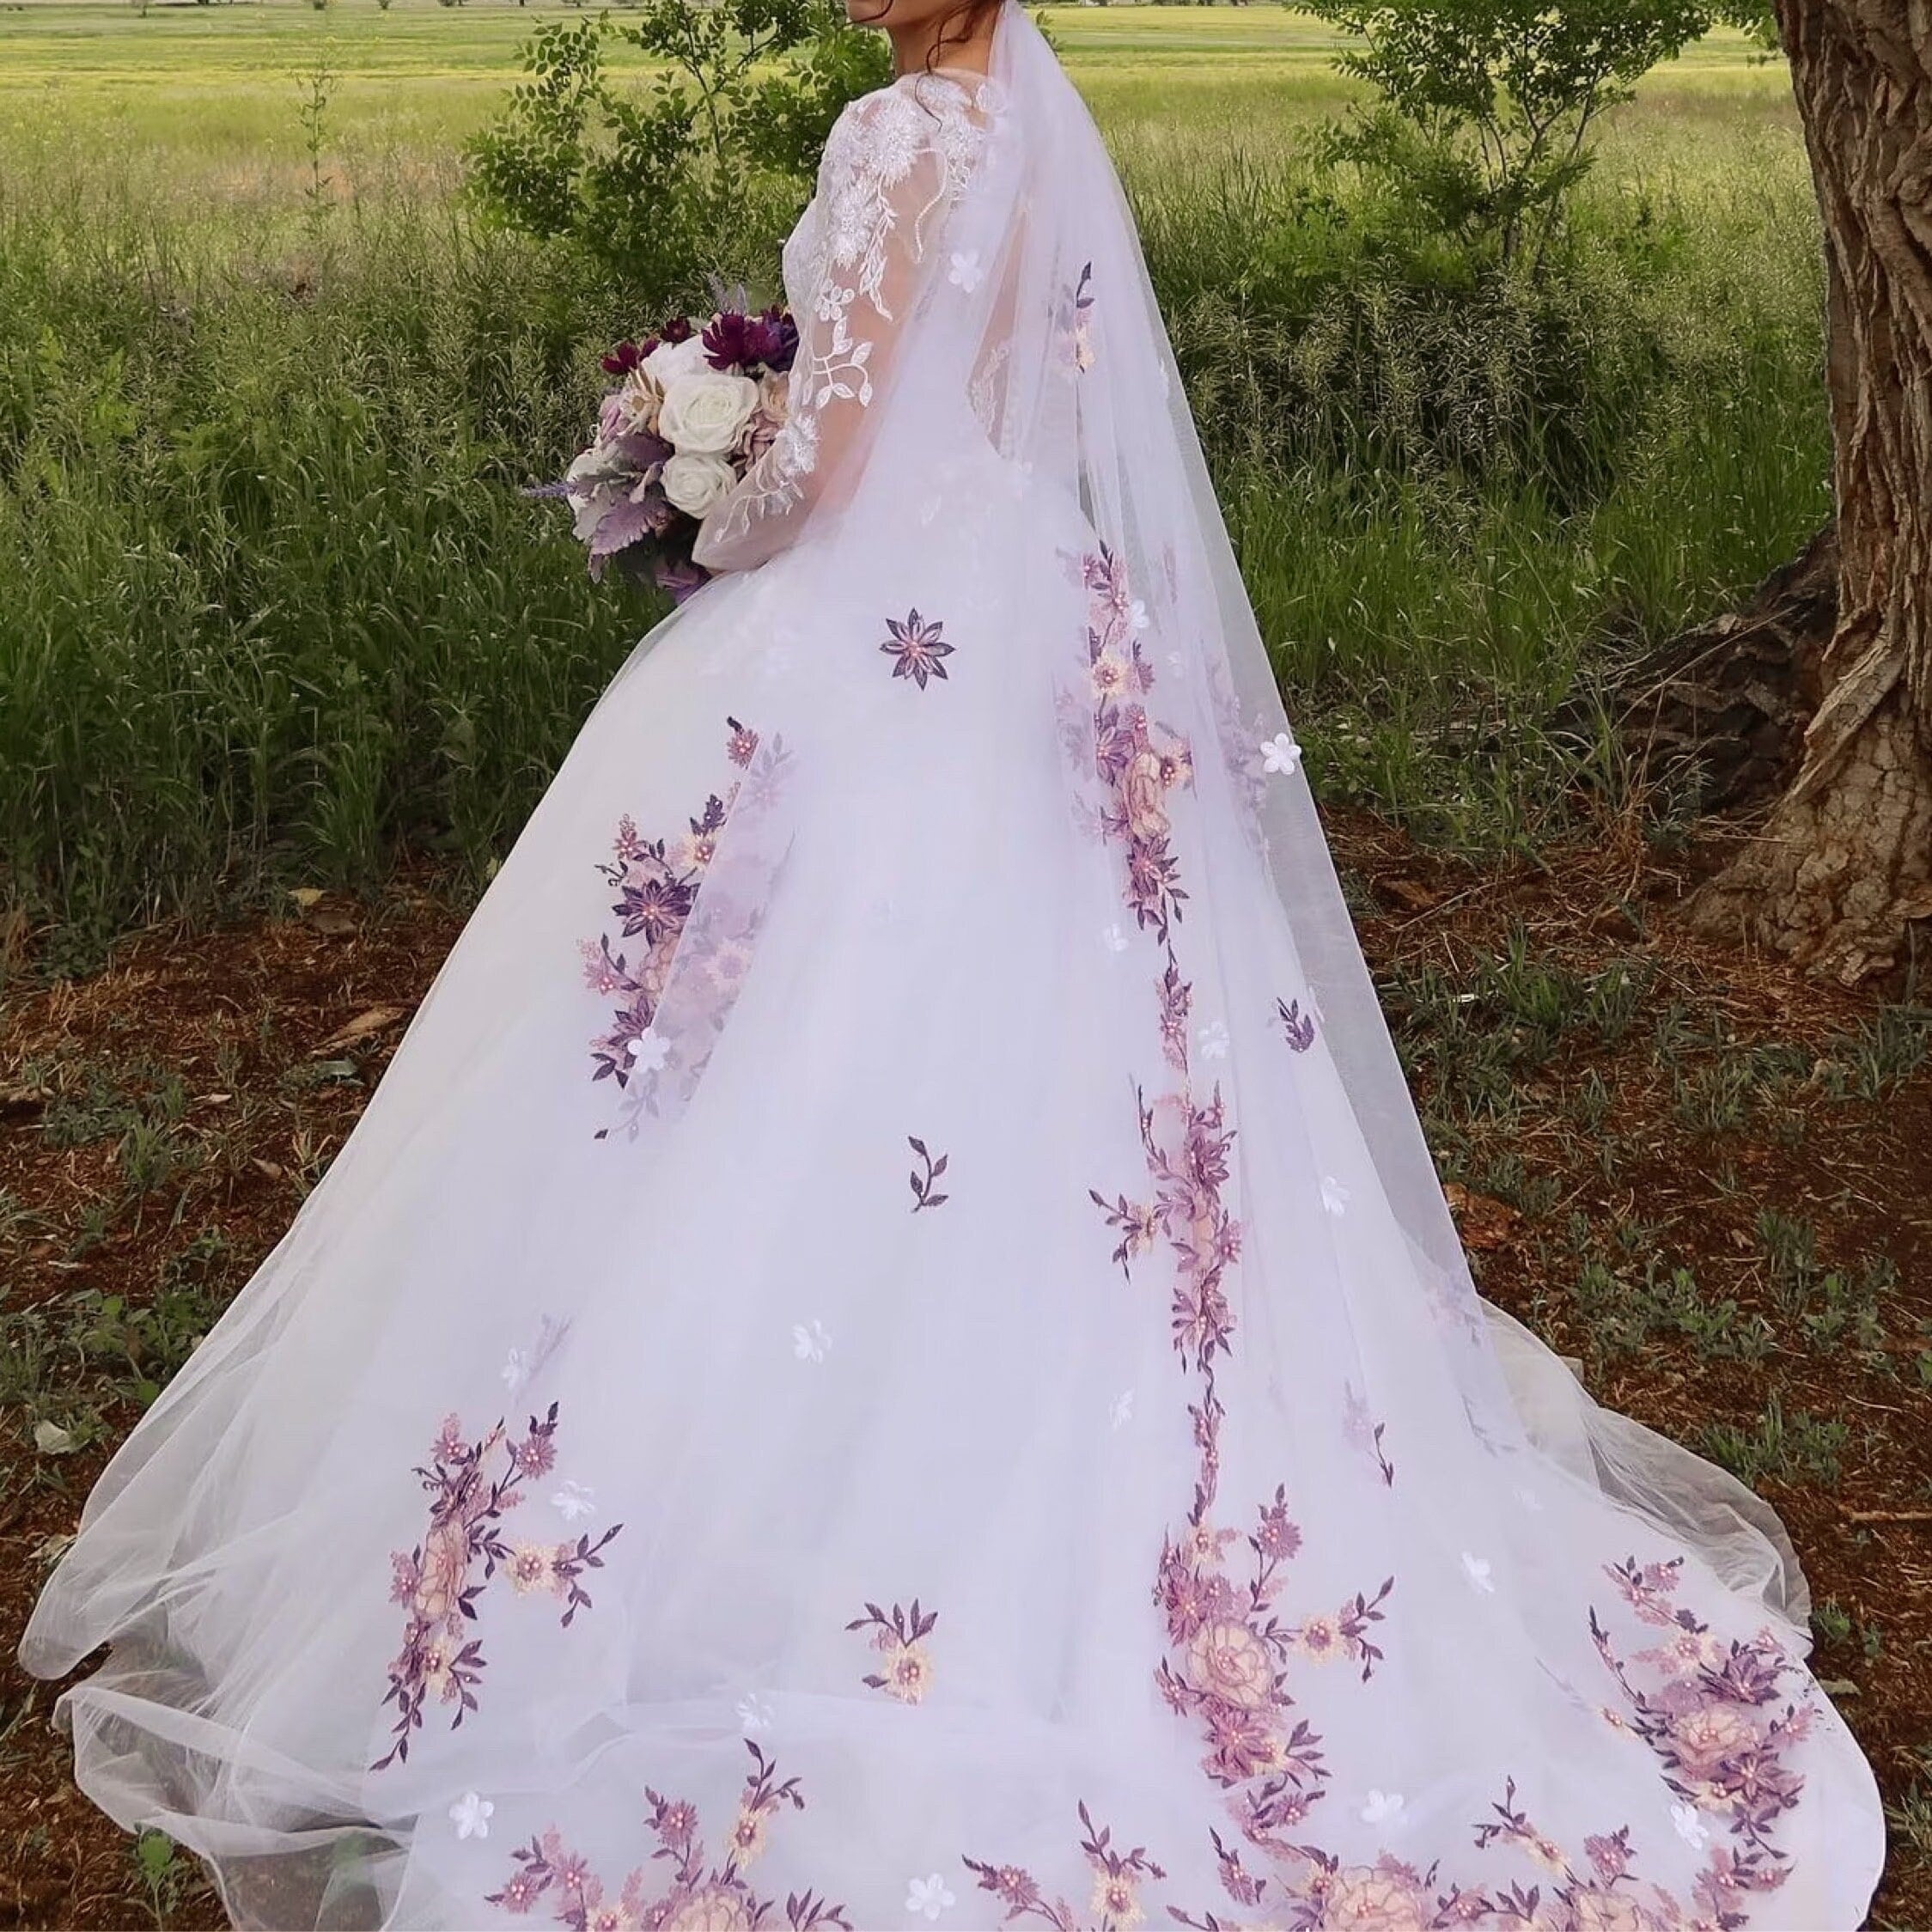 One Blushing Bride Floral Cathedral Wedding Veil with Flower Blooms in Chiffon Silk Light Ivory / 90 Inches